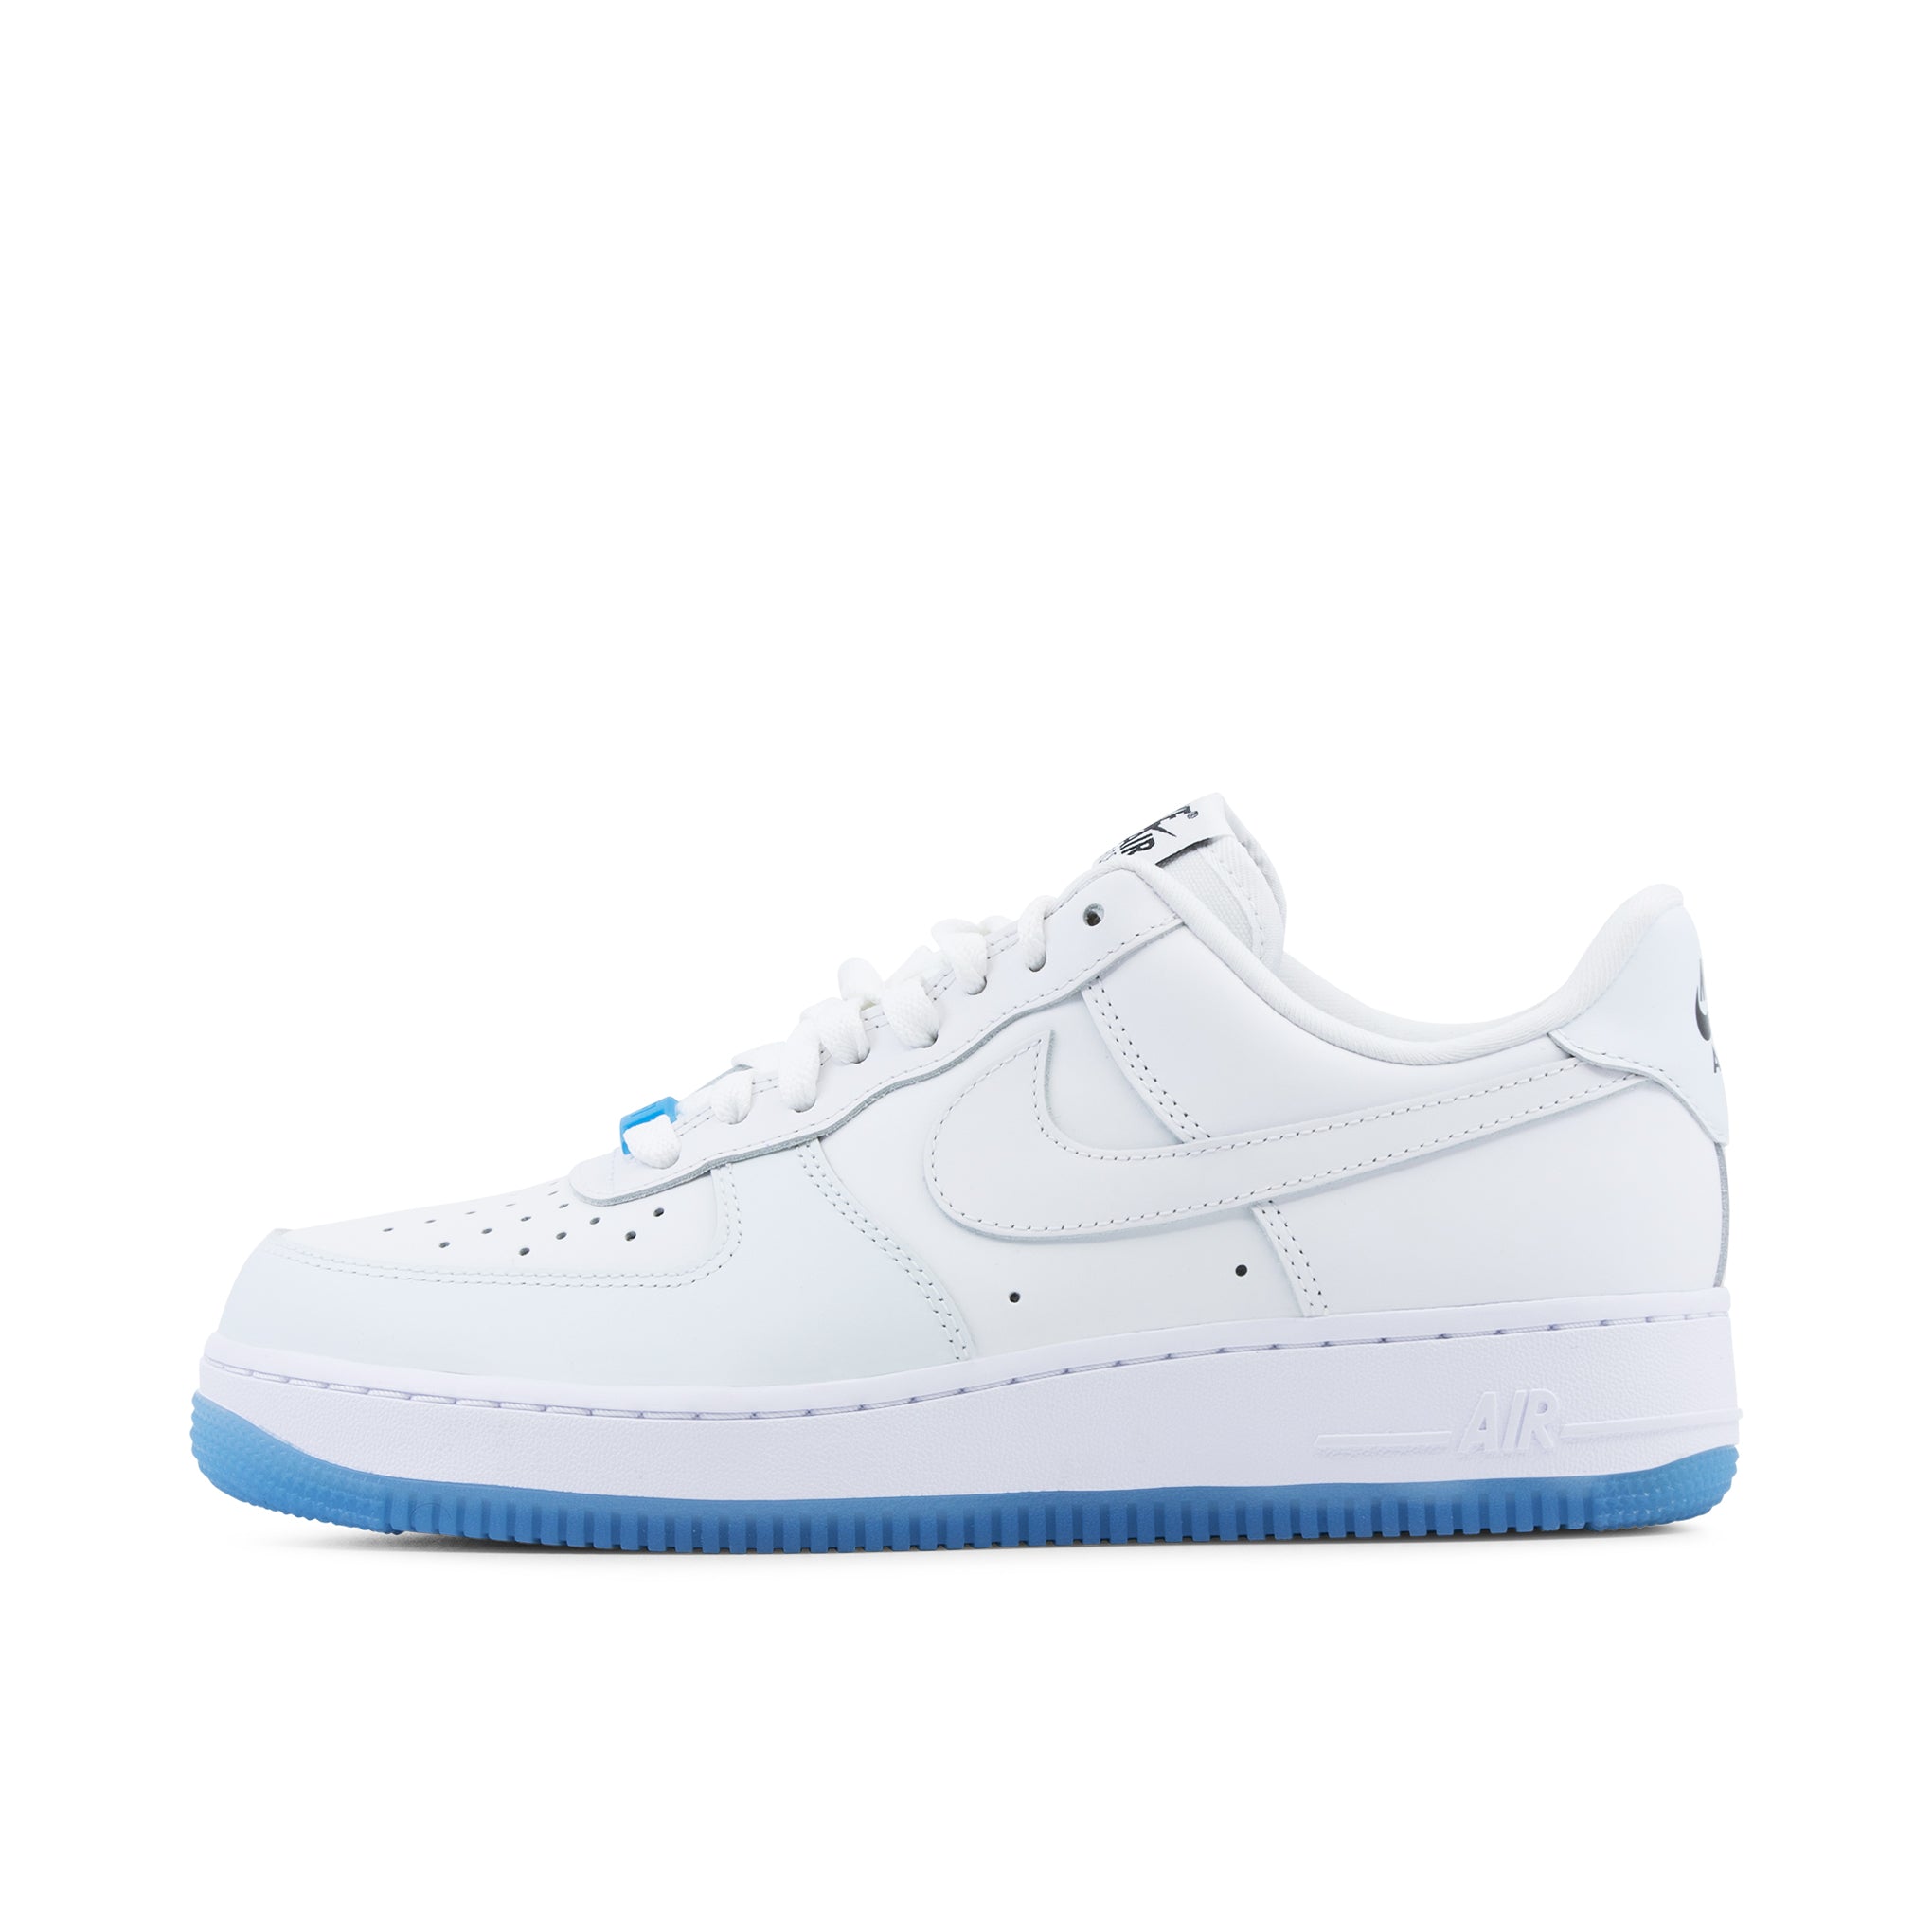 NIKE AIR FORCE 1 LOW WMNS UV REACTIVE